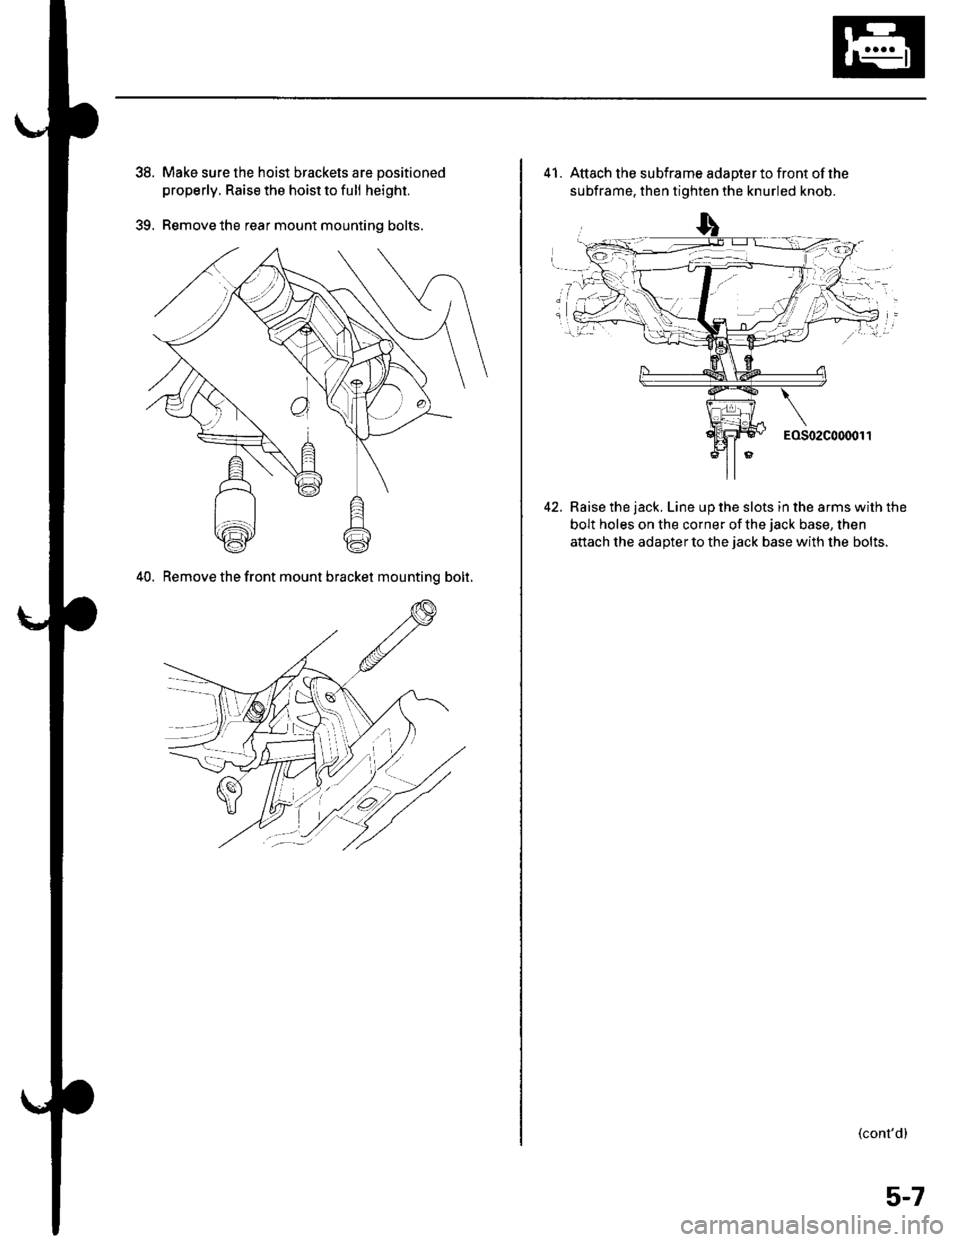 HONDA CIVIC 2003 7.G User Guide 39.
Make sure the hoist brackets are positioned
properly. Raise the hoist to full height.
Remove the rear mount mounting bolts.
40. Remove the front mount bracket mountinq bolt.
41. Attach the subfram